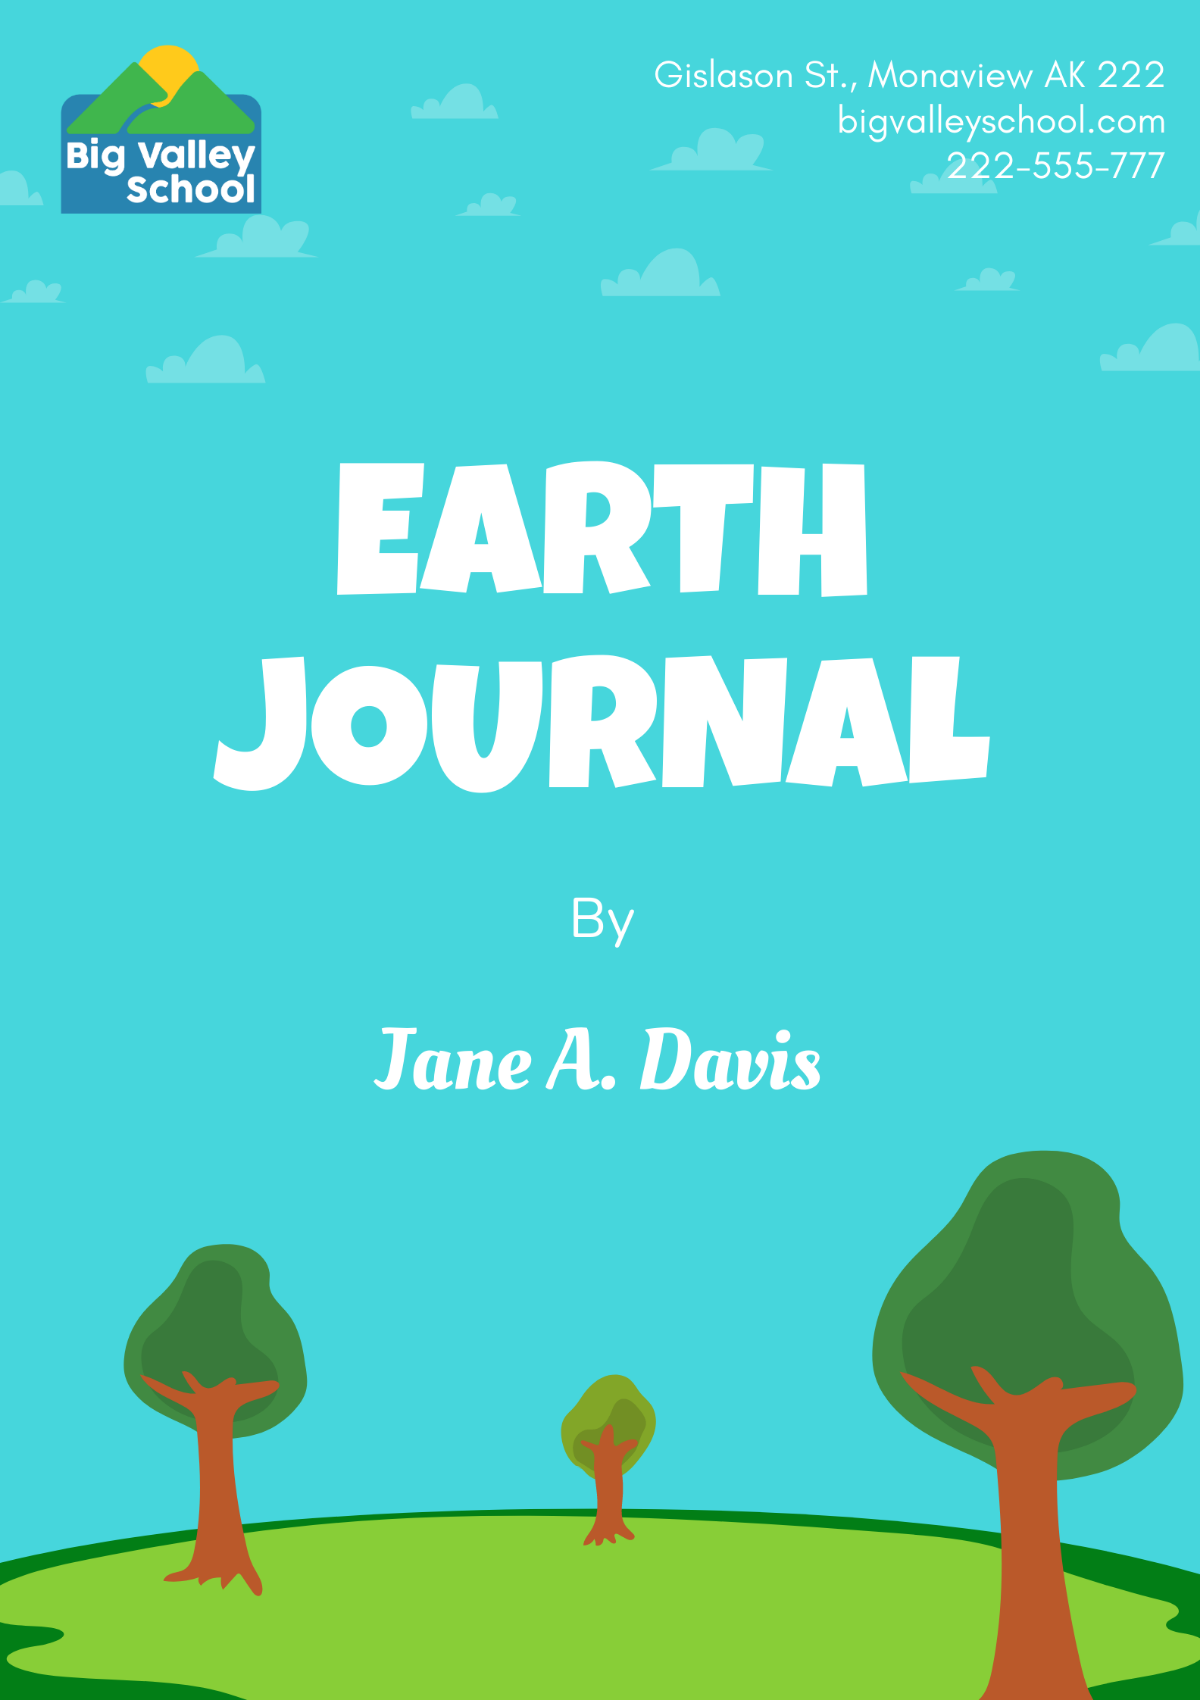 Earth Journal Template